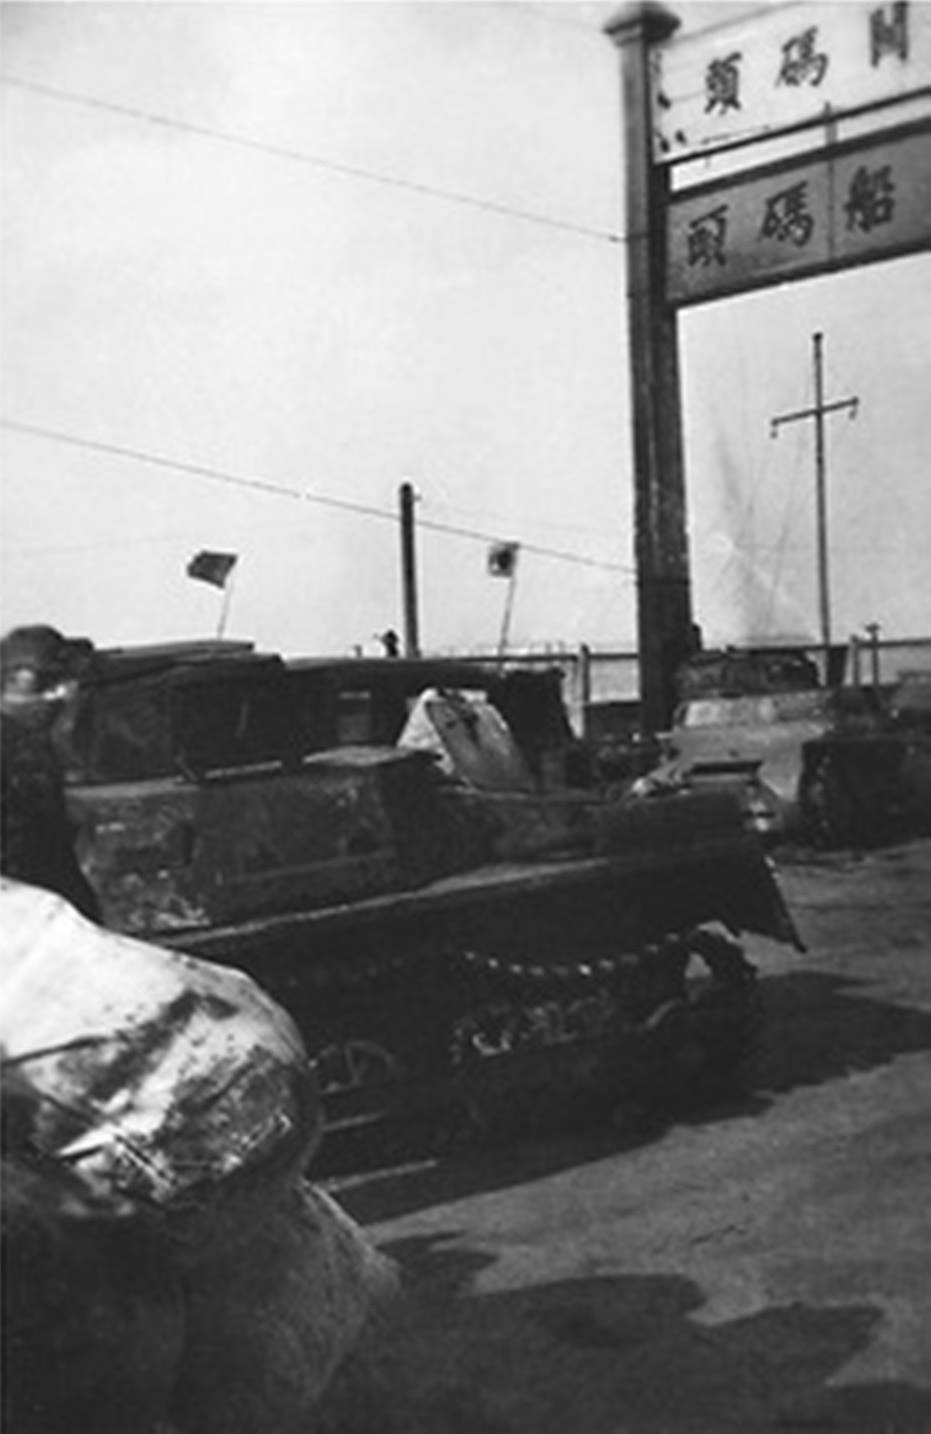 Partially sabotaged Chinese Panzer I Ausf A tanks at the port of Nanjing, China, mid-Dec 1937